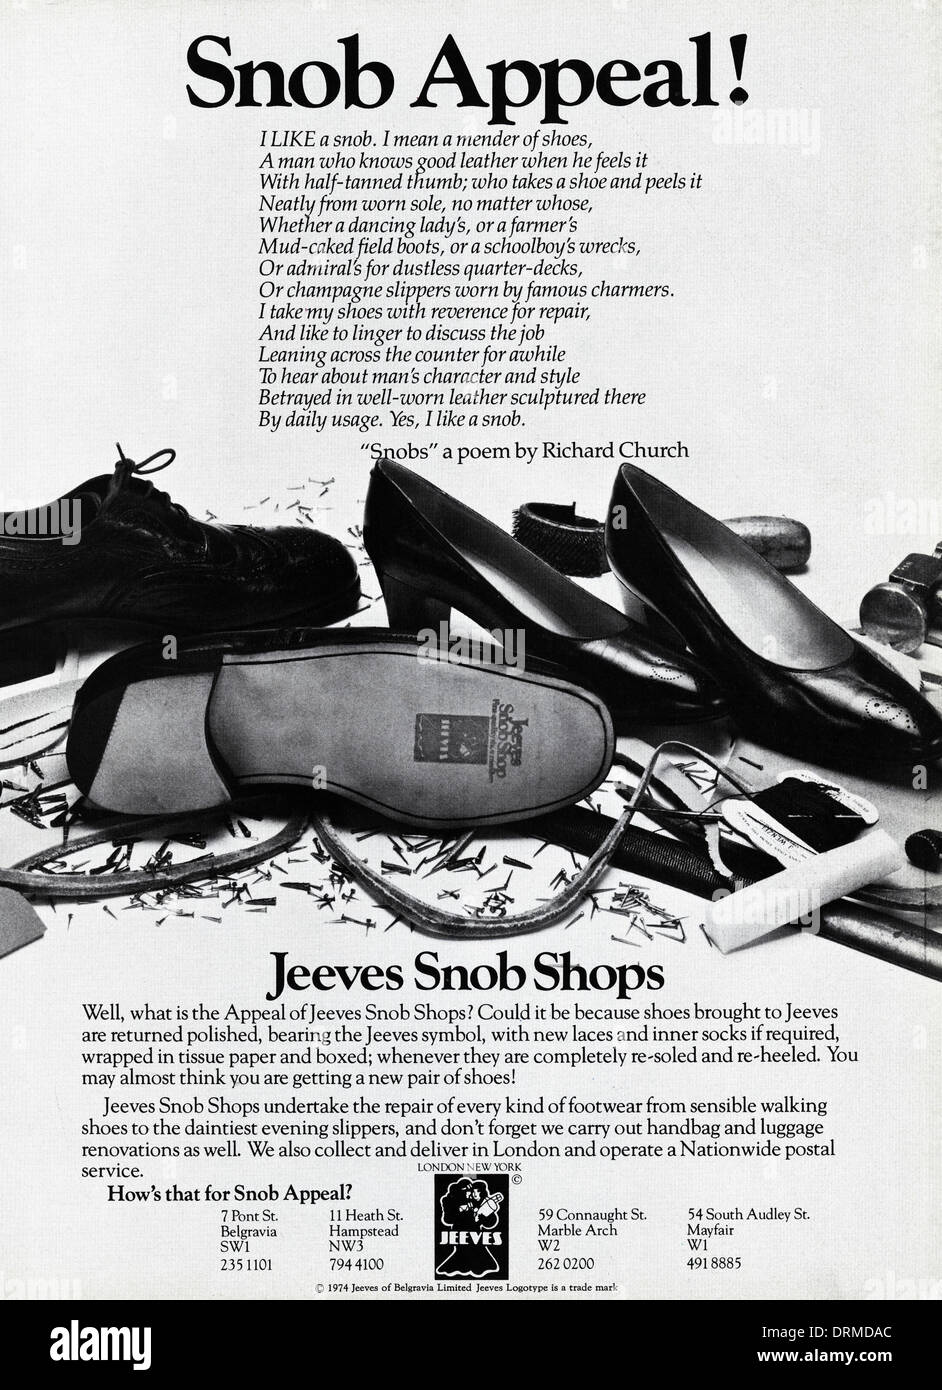 1980s Fashion Magazine Advertisement Advertising Shoes By